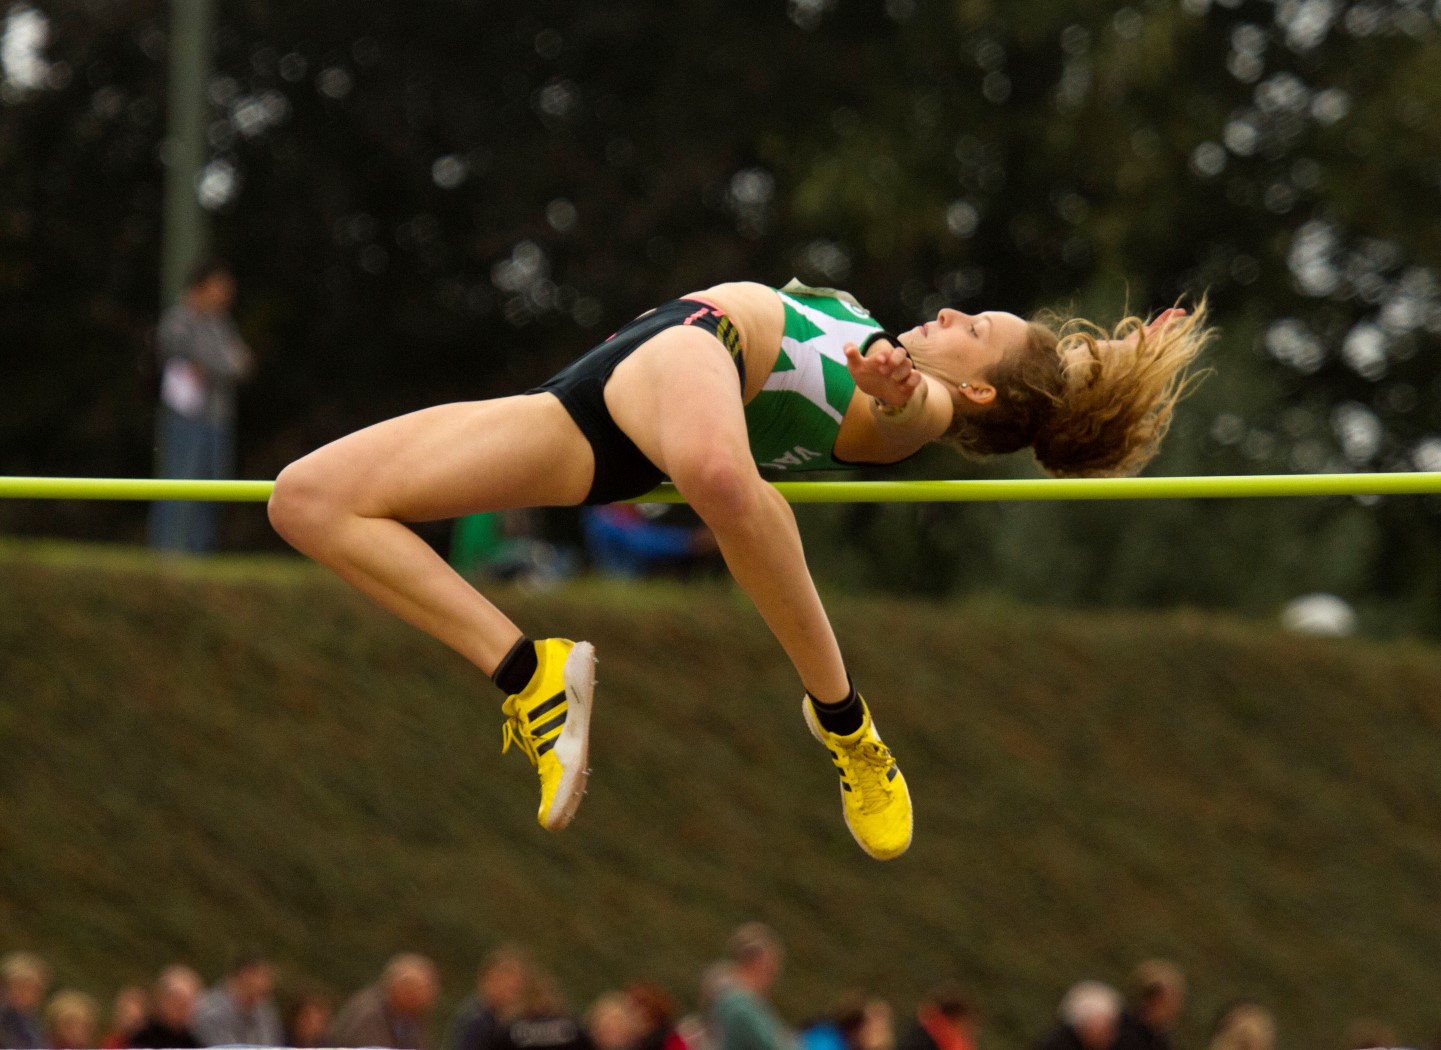 R tutorial with pole vault and high jump results: Clearing a new bar/